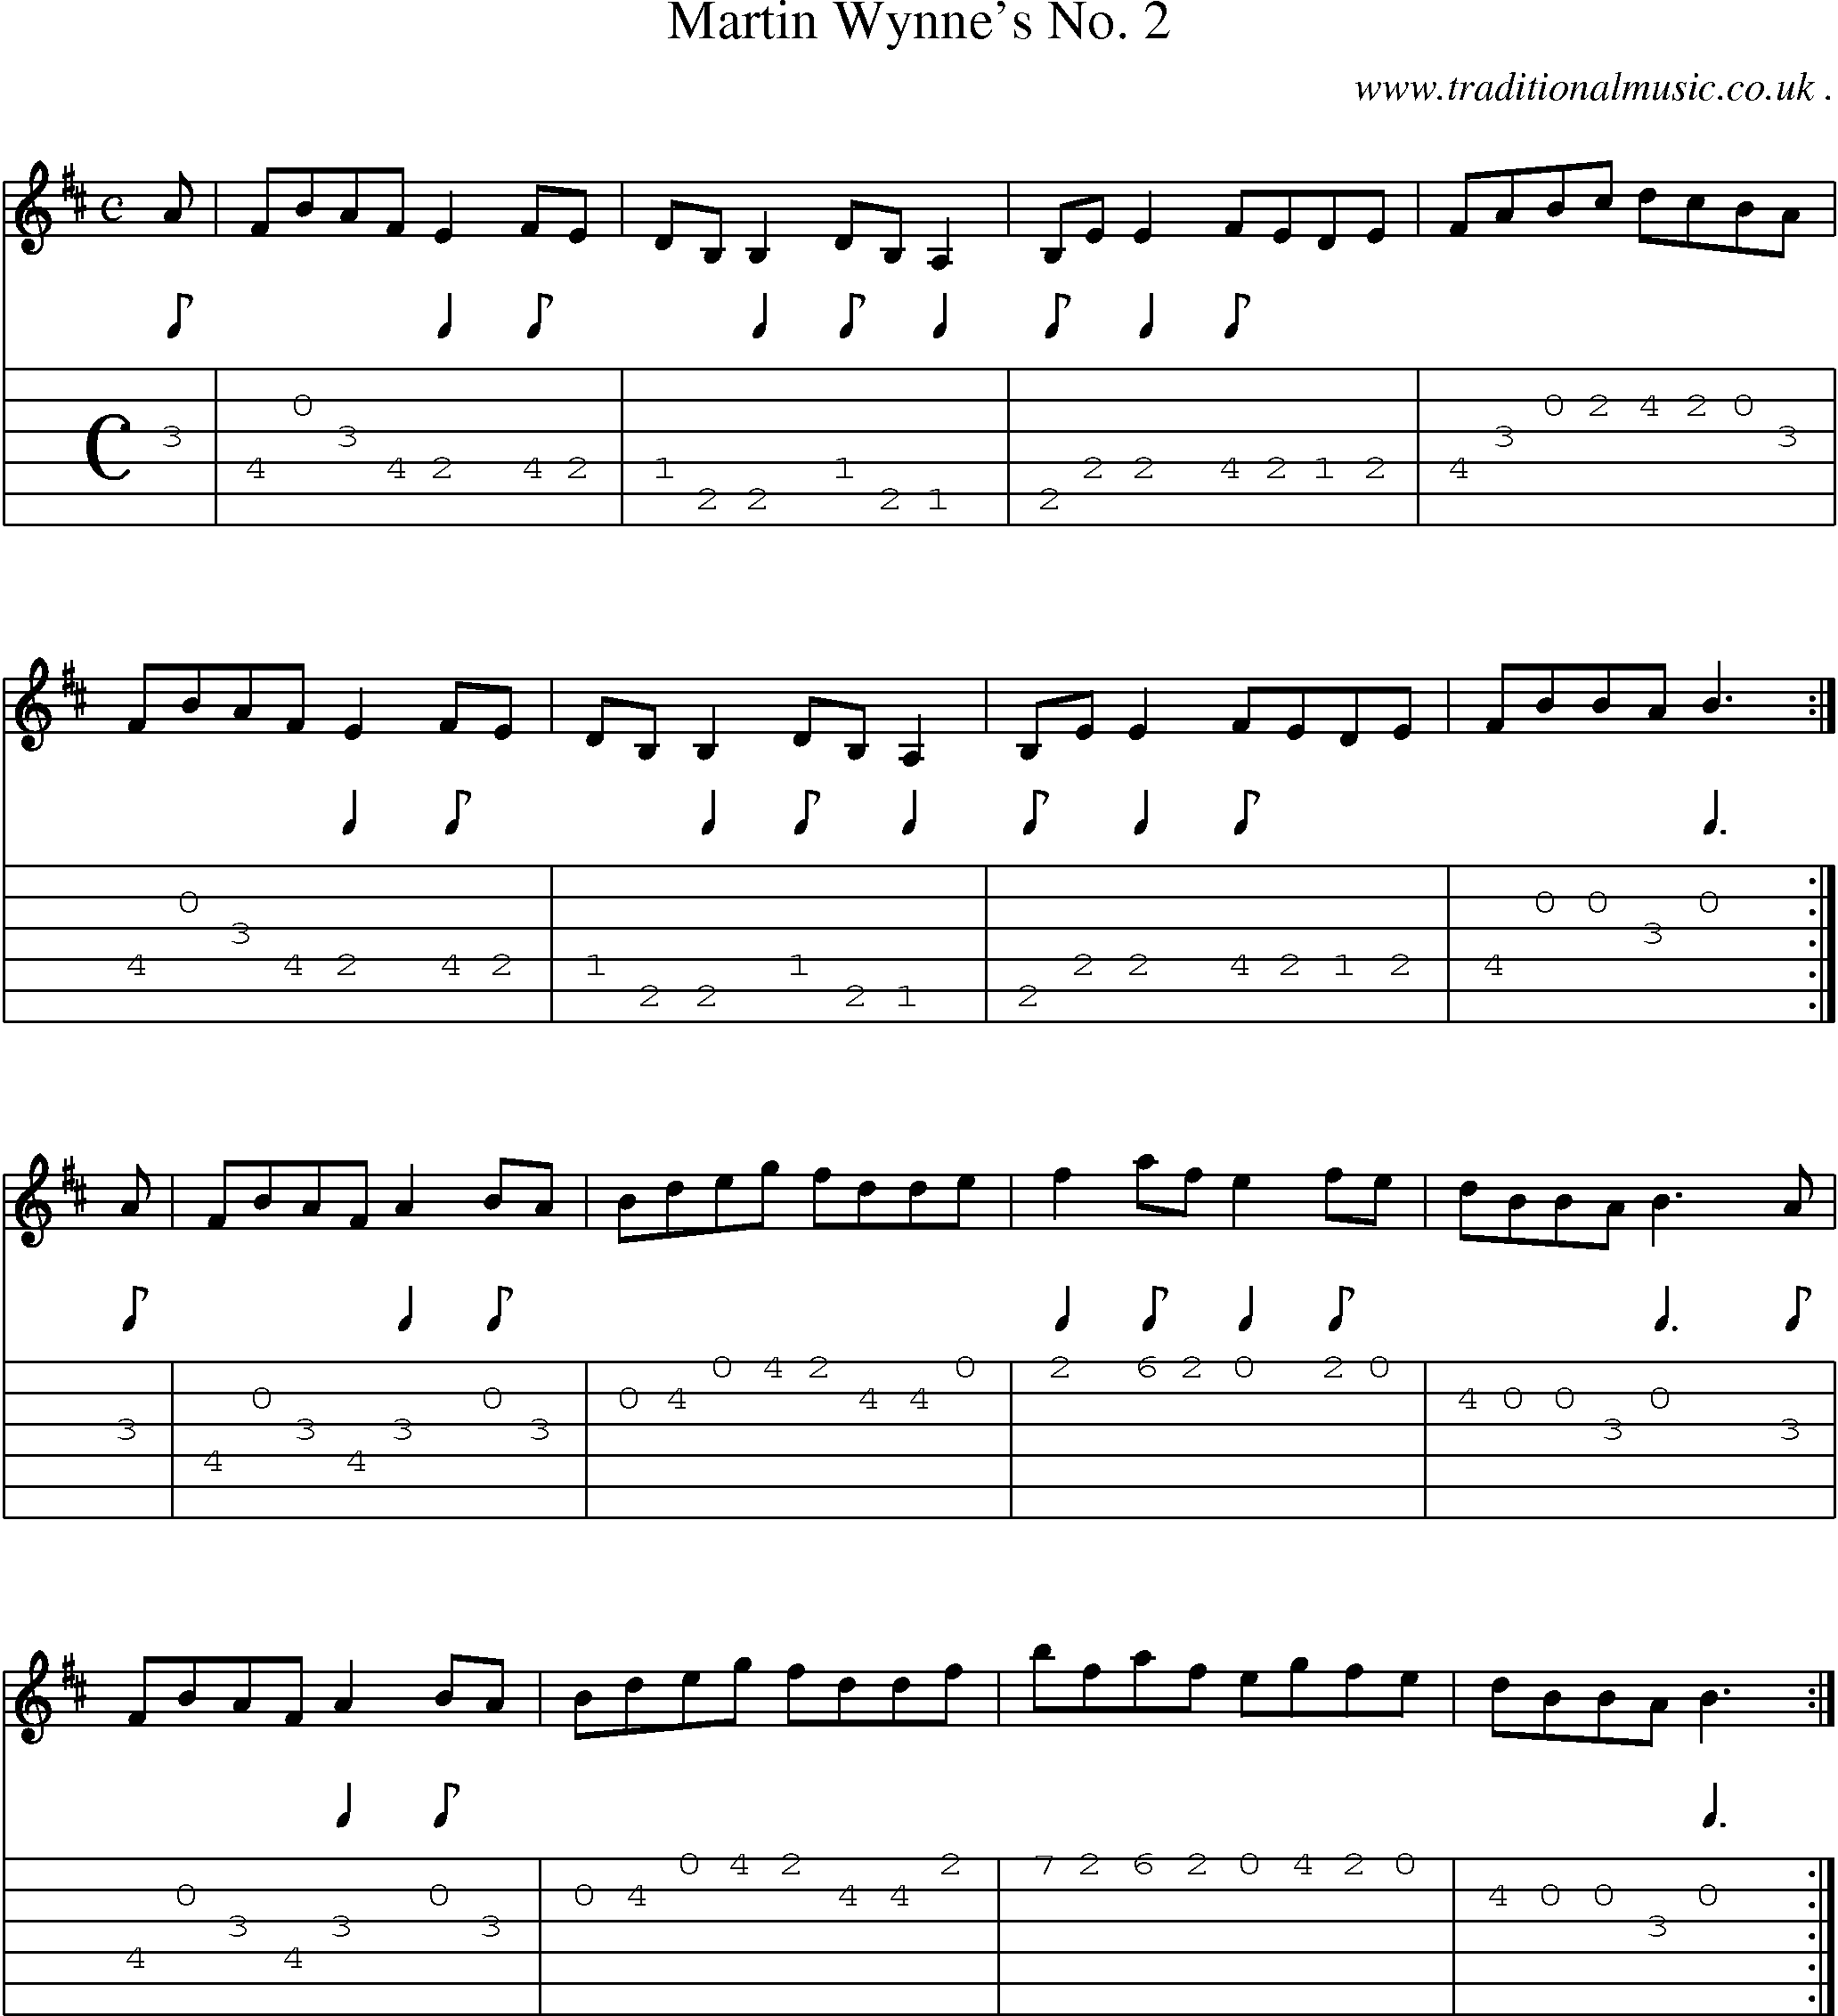 Sheet-Music and Guitar Tabs for Martin Wynnes No 2